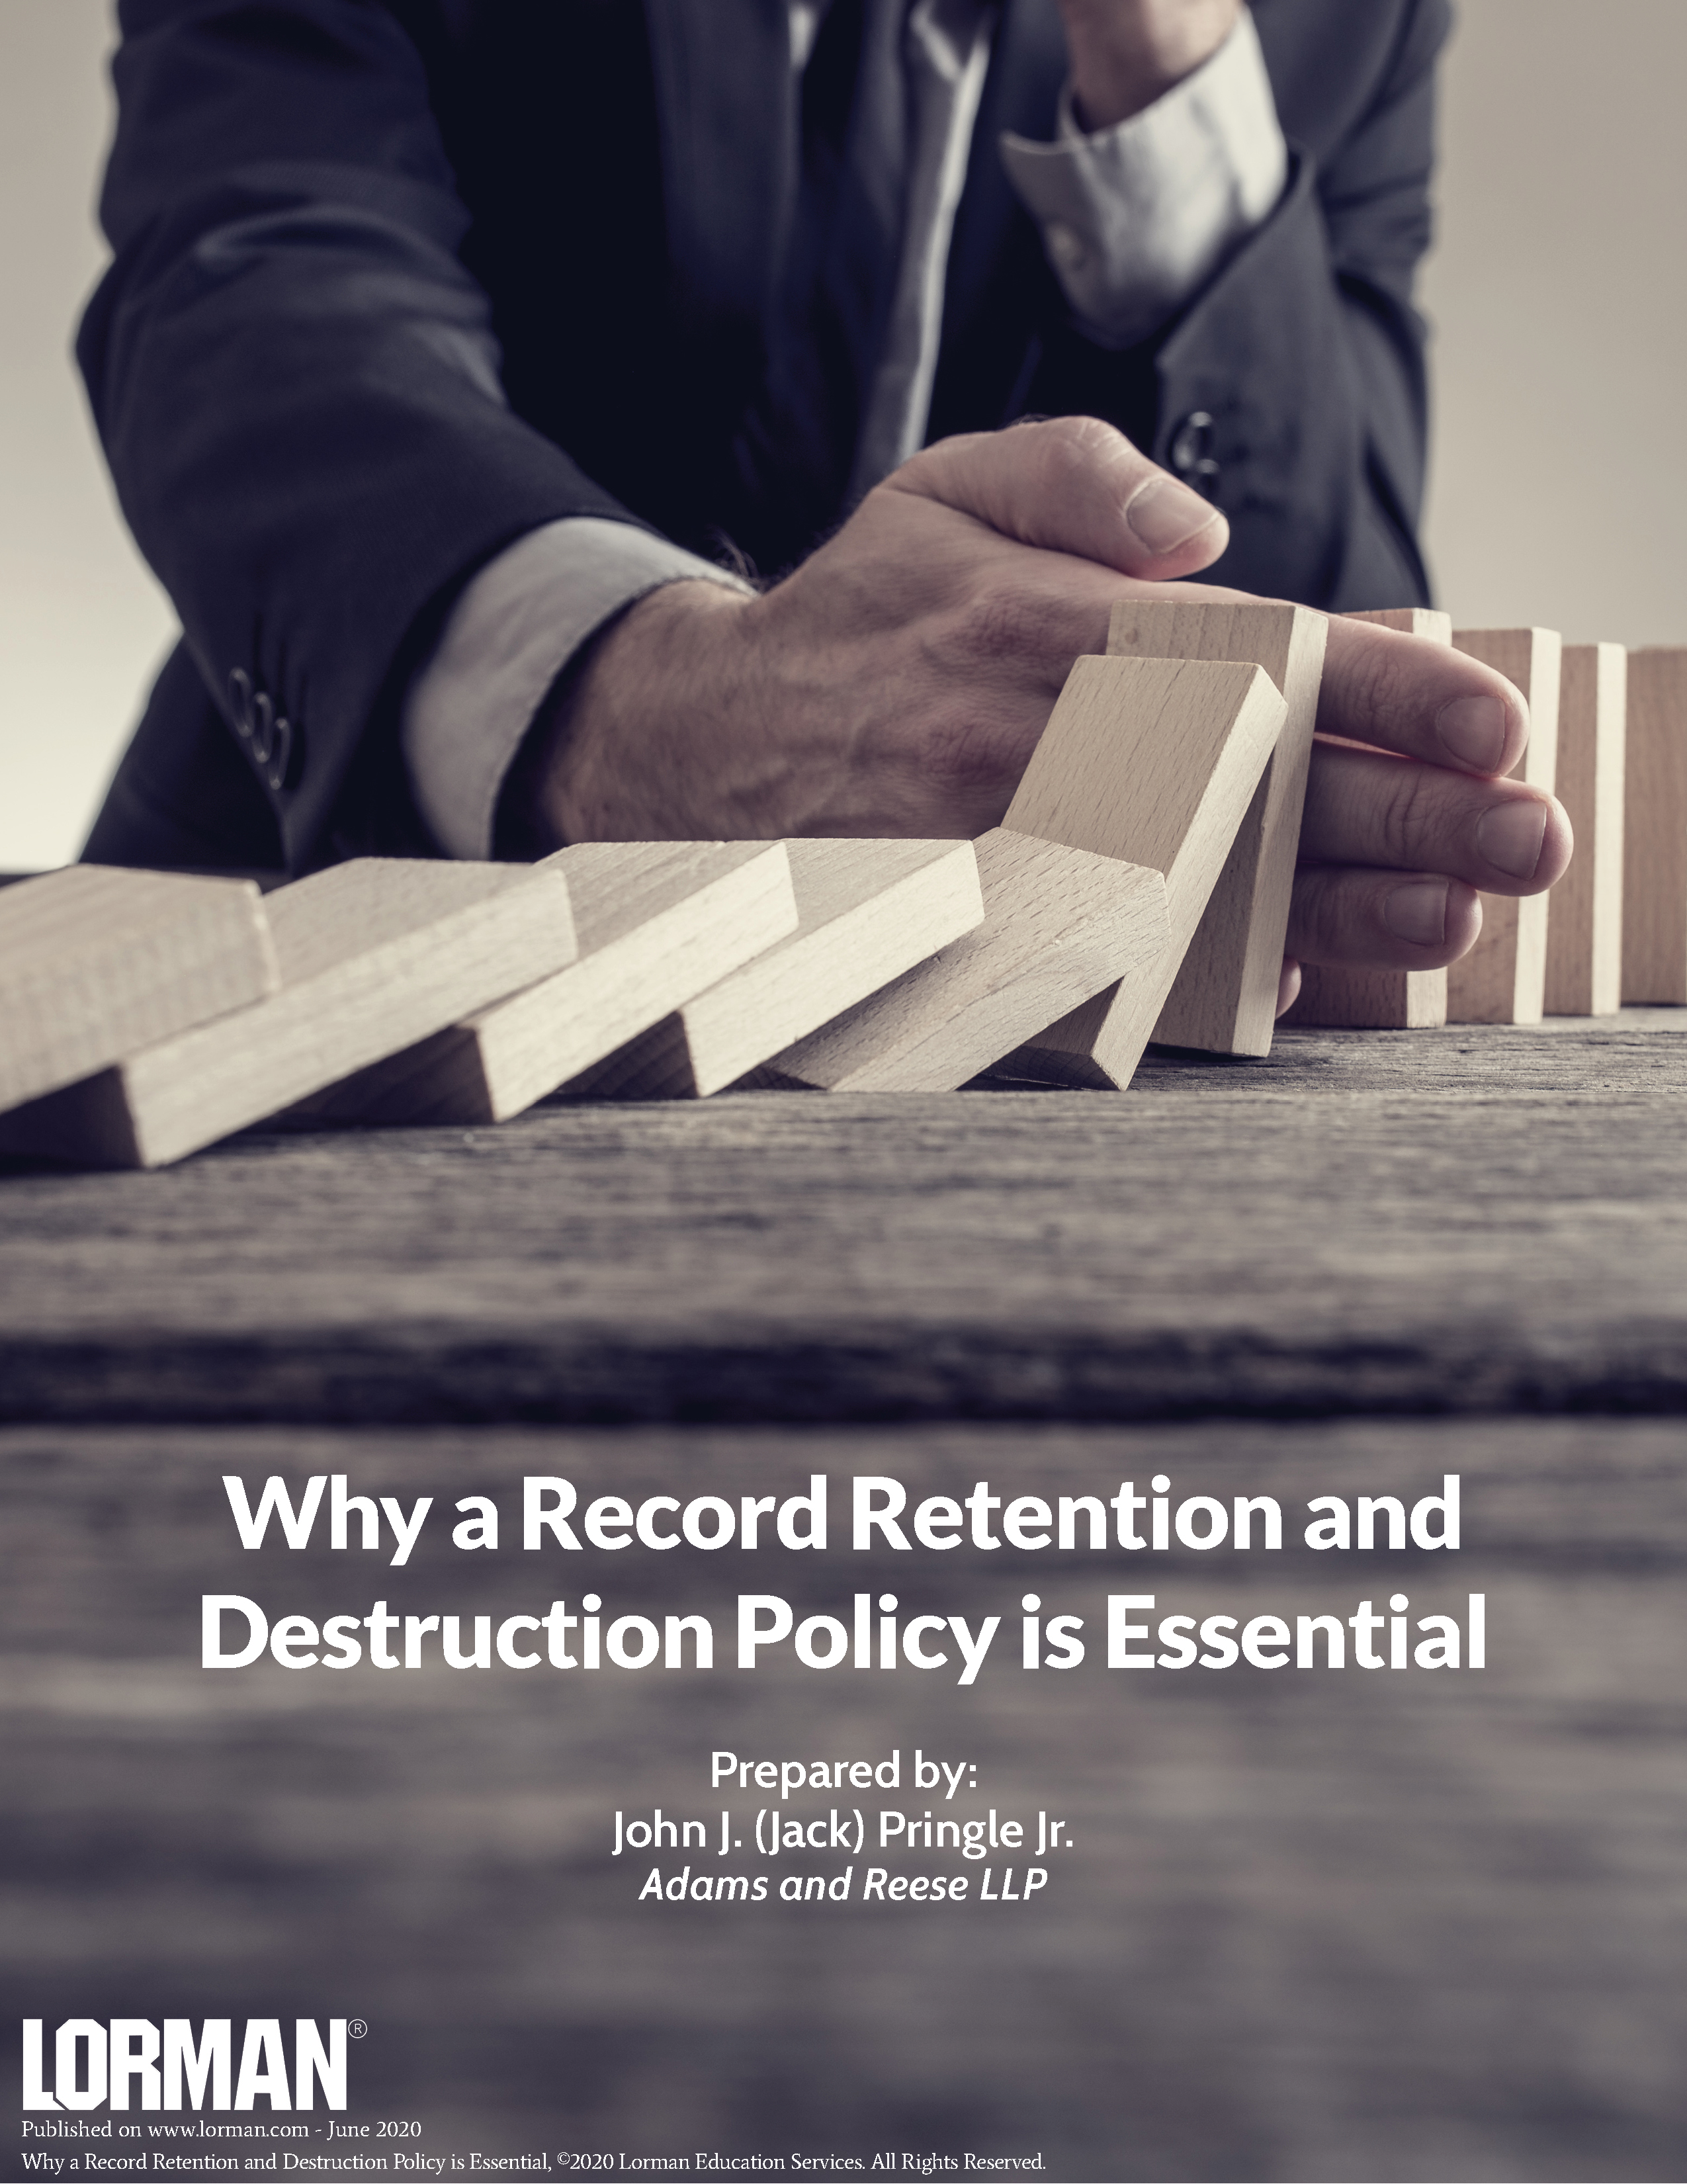 Why a Record Retention and Destruction Policy is Essential